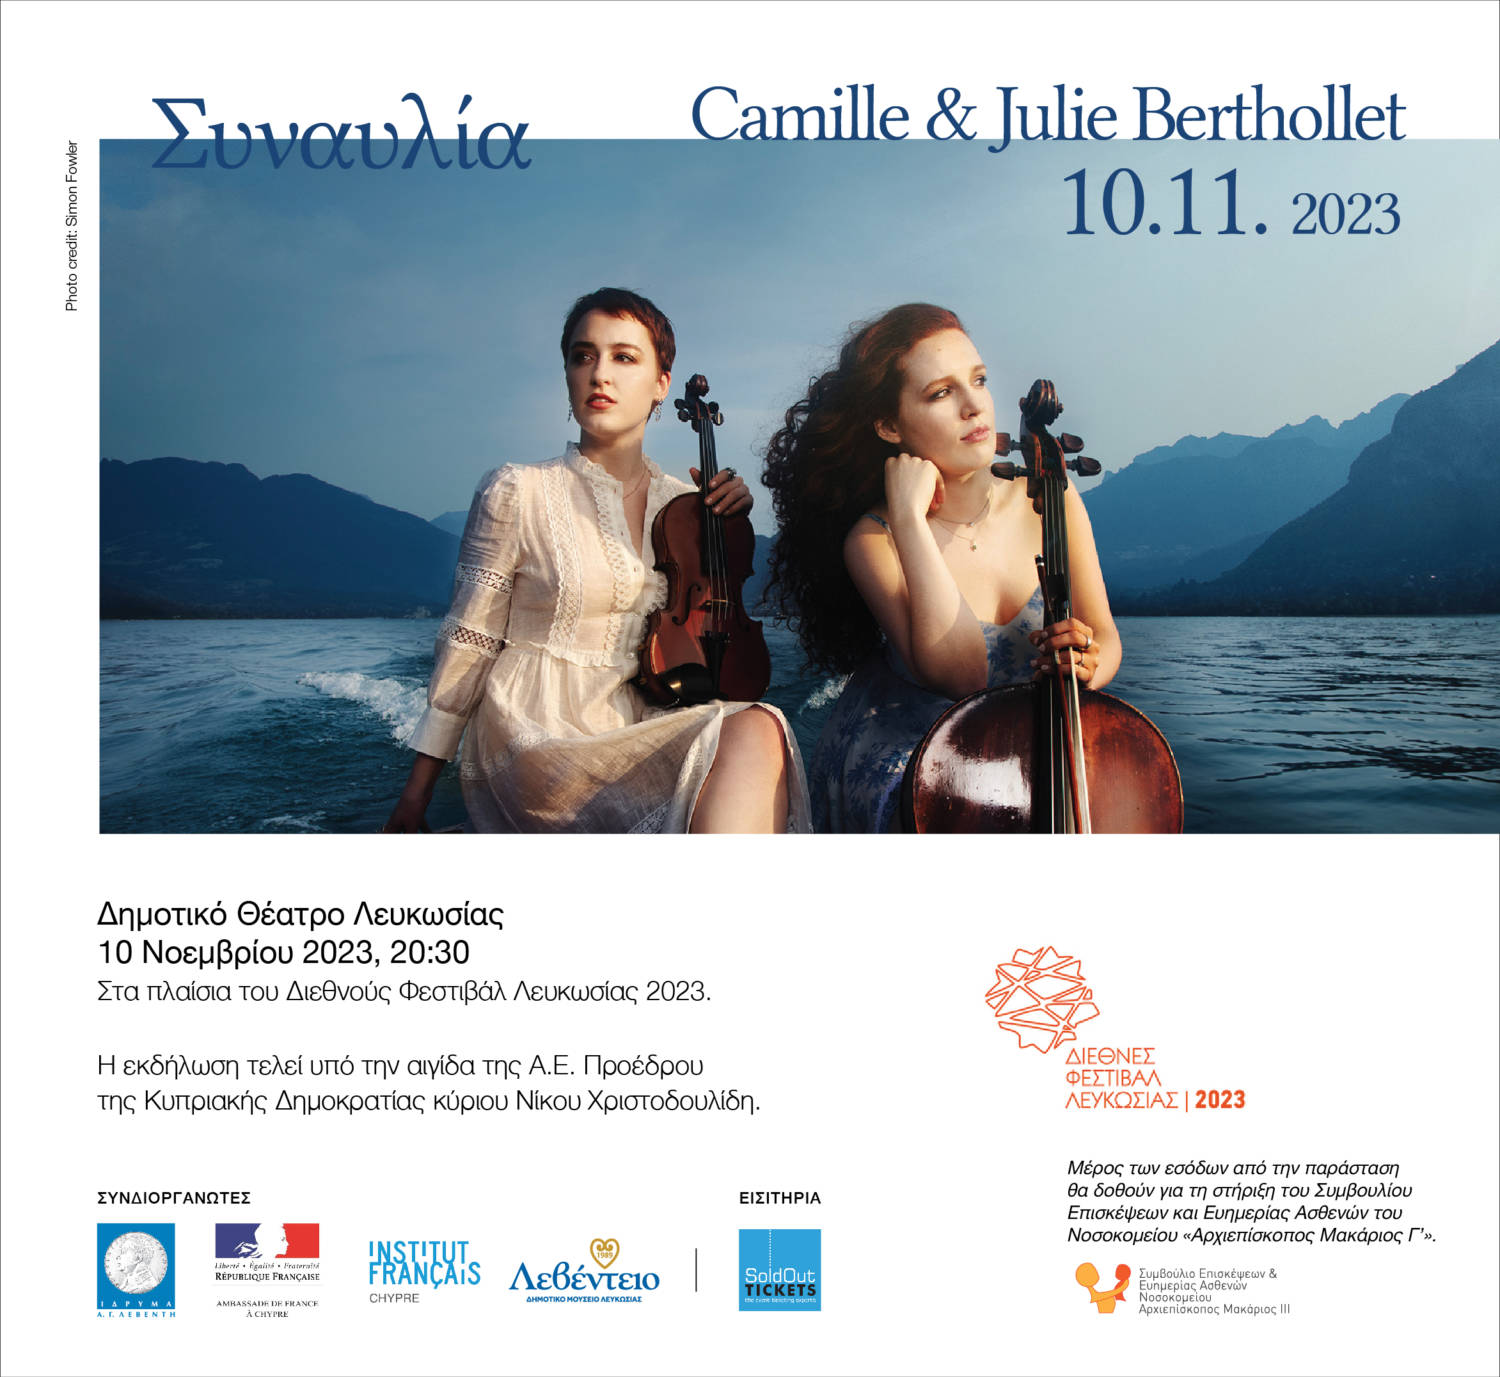 Berthollet sisters travel to Cyprus for charity concert